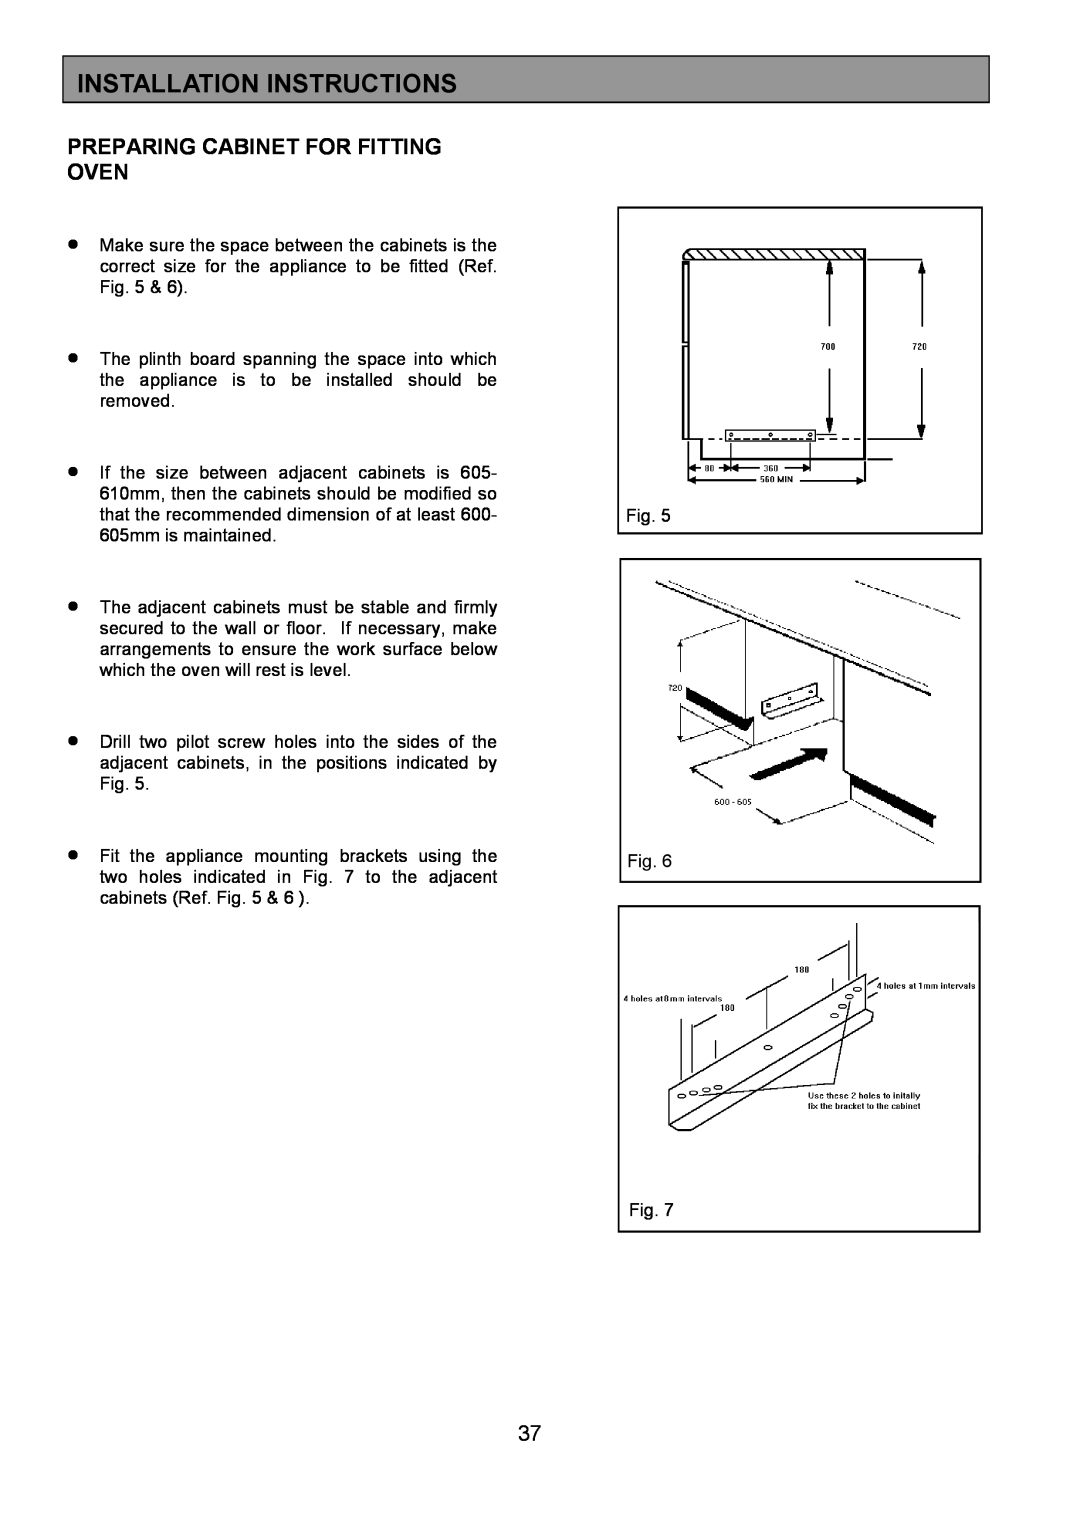 Zanussi ZHF865 manual Preparing Cabinet For Fitting Oven, Installation Instructions 